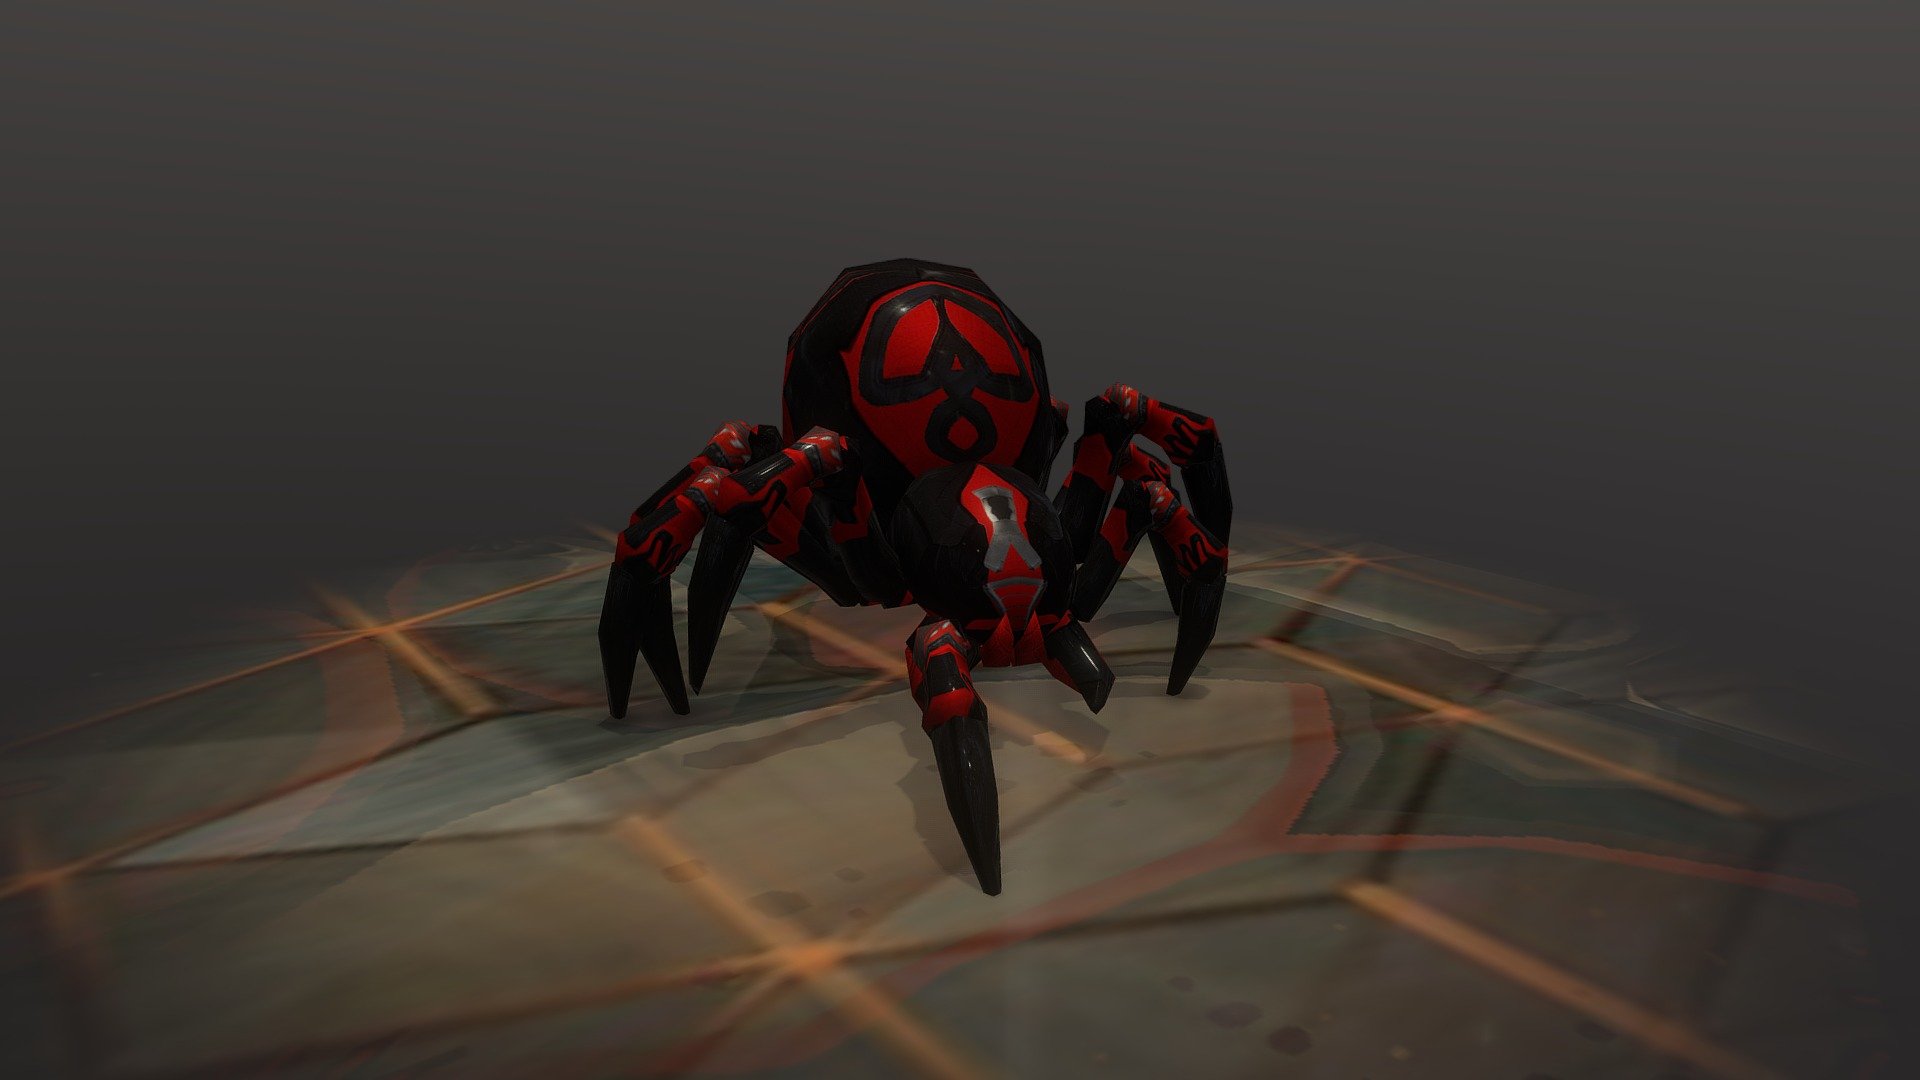 This spider is textured by a spiderman suit so this might be waiting for Cyborg Spider a bit creepy but with spiderman suit 3d model